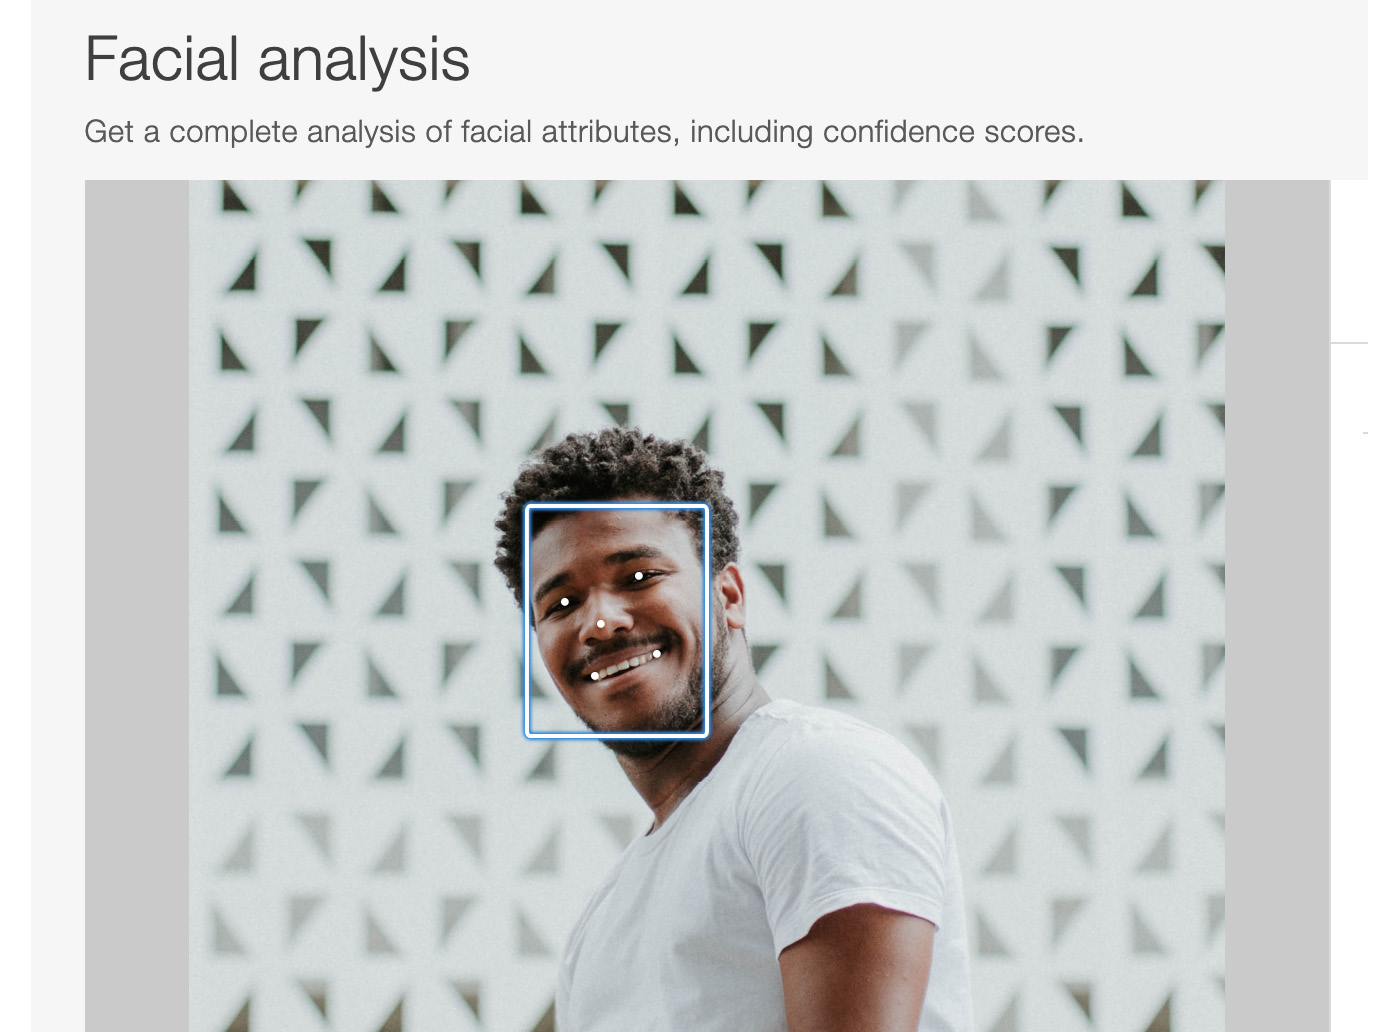 Figure 6.22: First sample image for facial analysis
